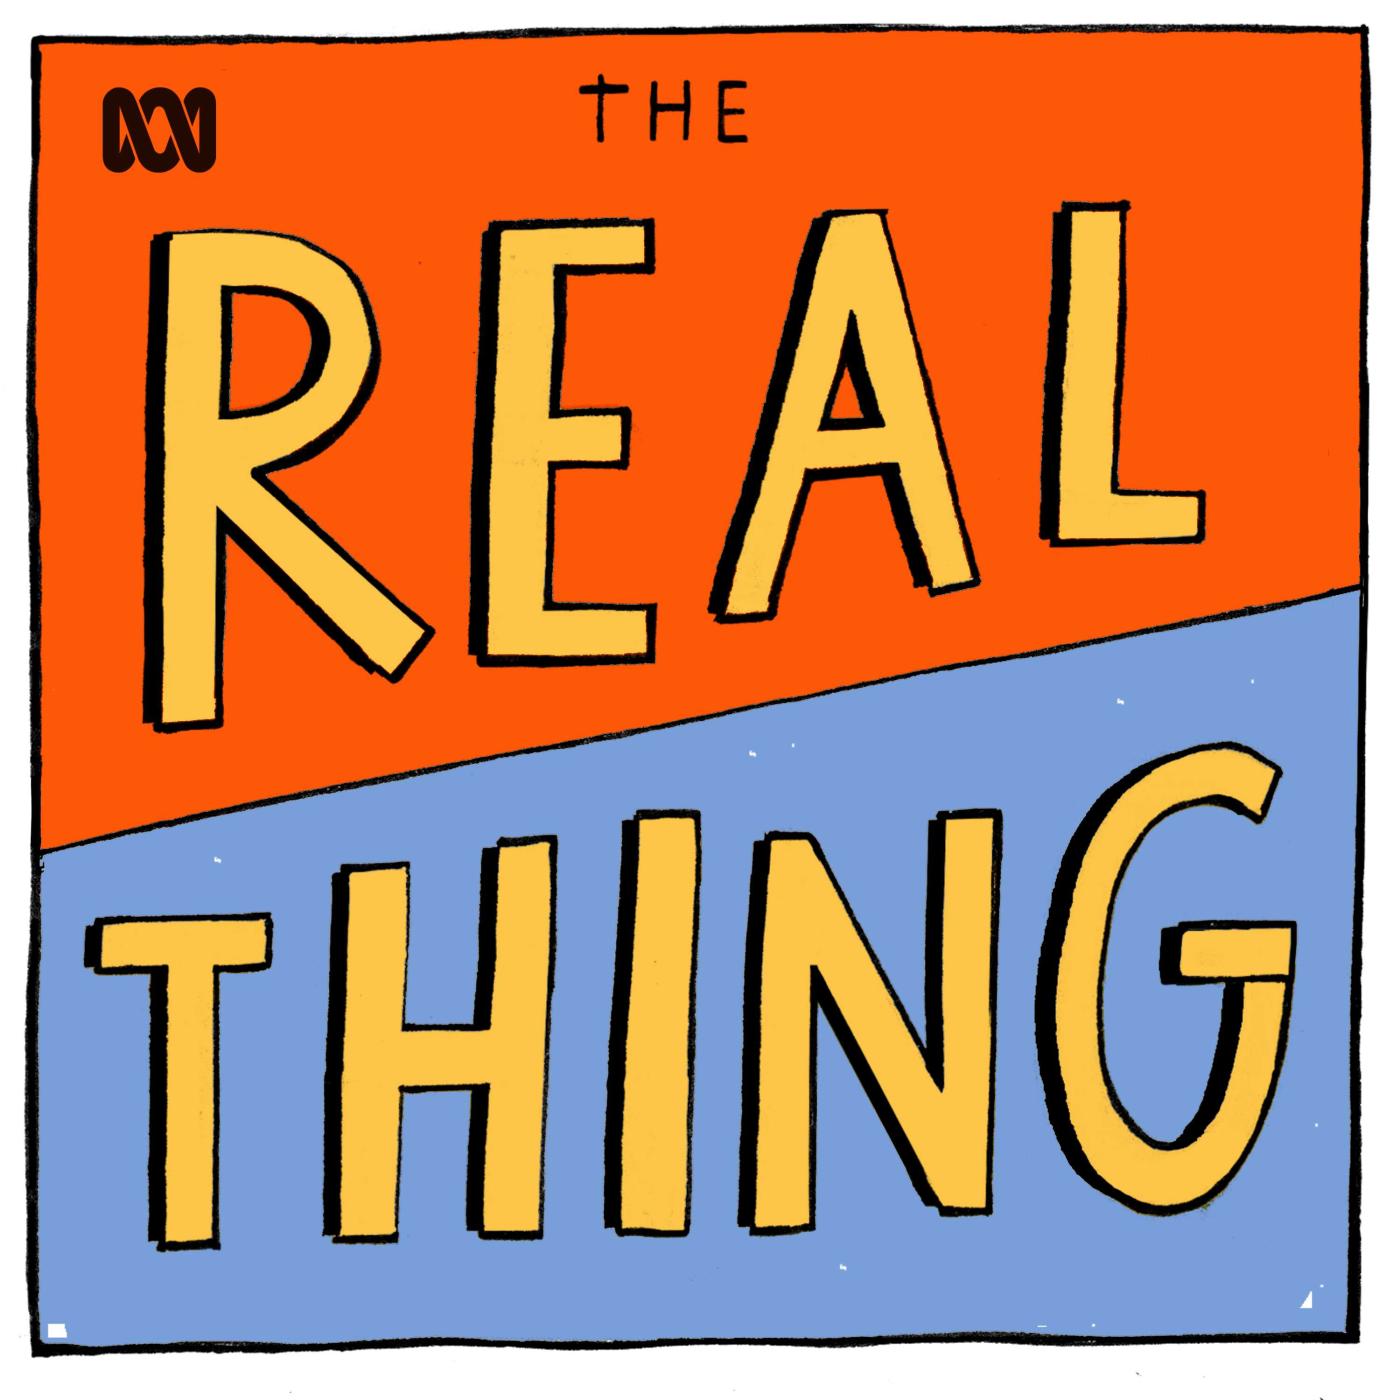 The Real Thing podcast tile, designed by Steph Hughes